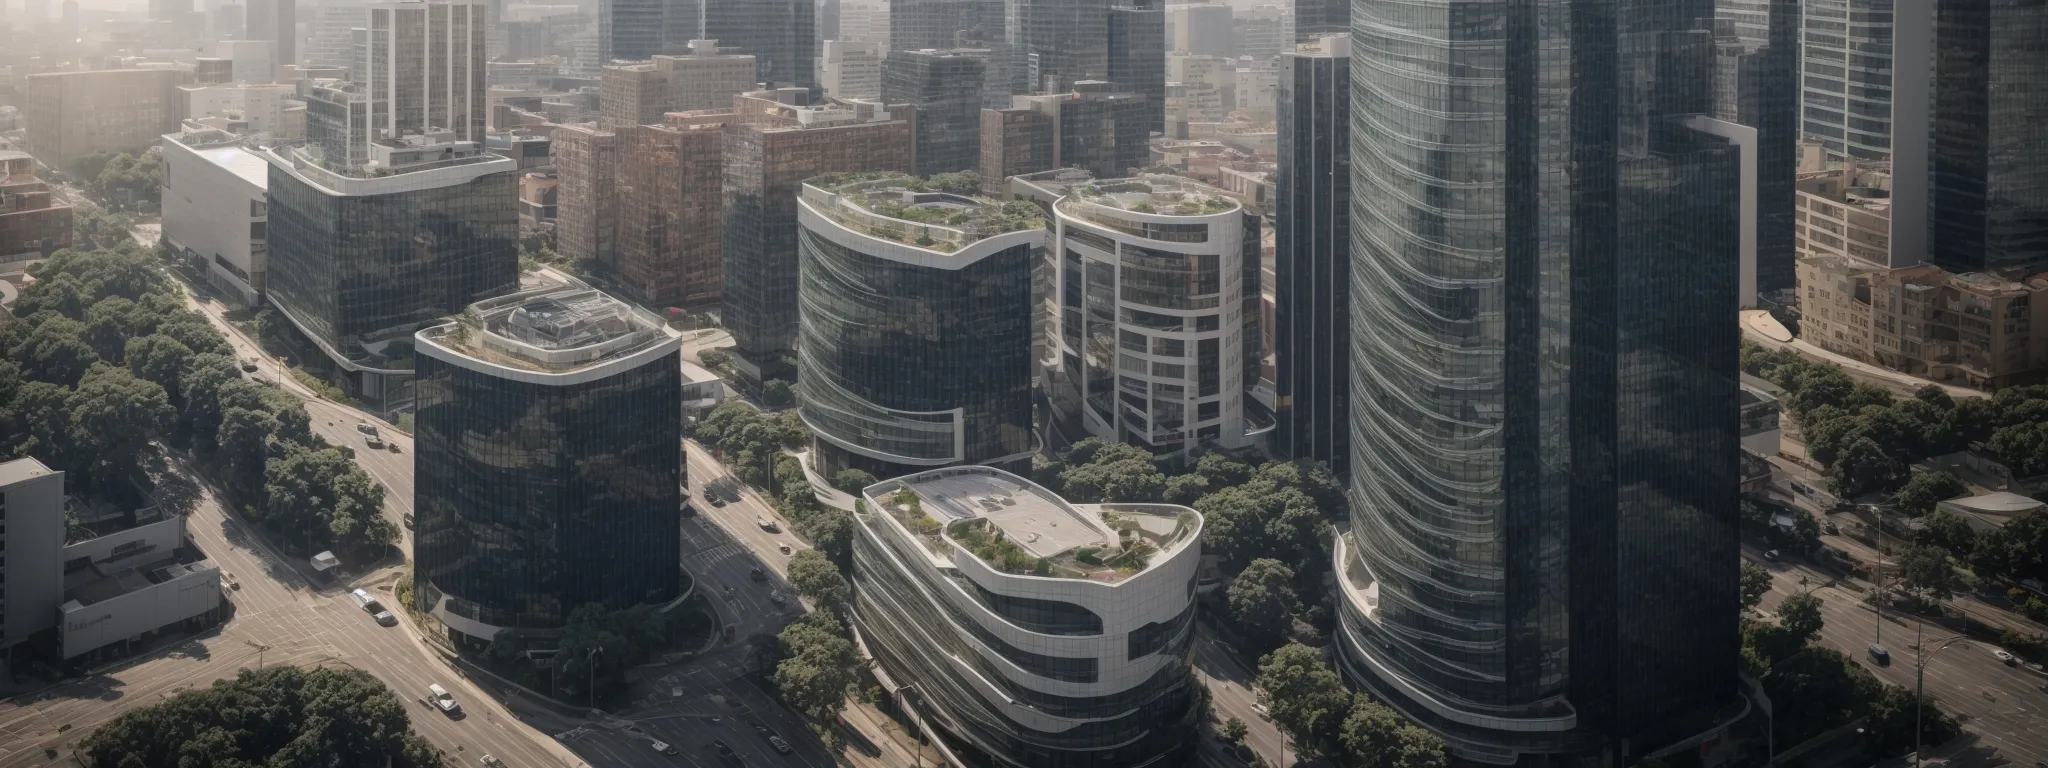 a high-rise office building symbolizes a reputable company in the heart of a bustling business district, intertwined with a network of roads representing connection and traffic flow.